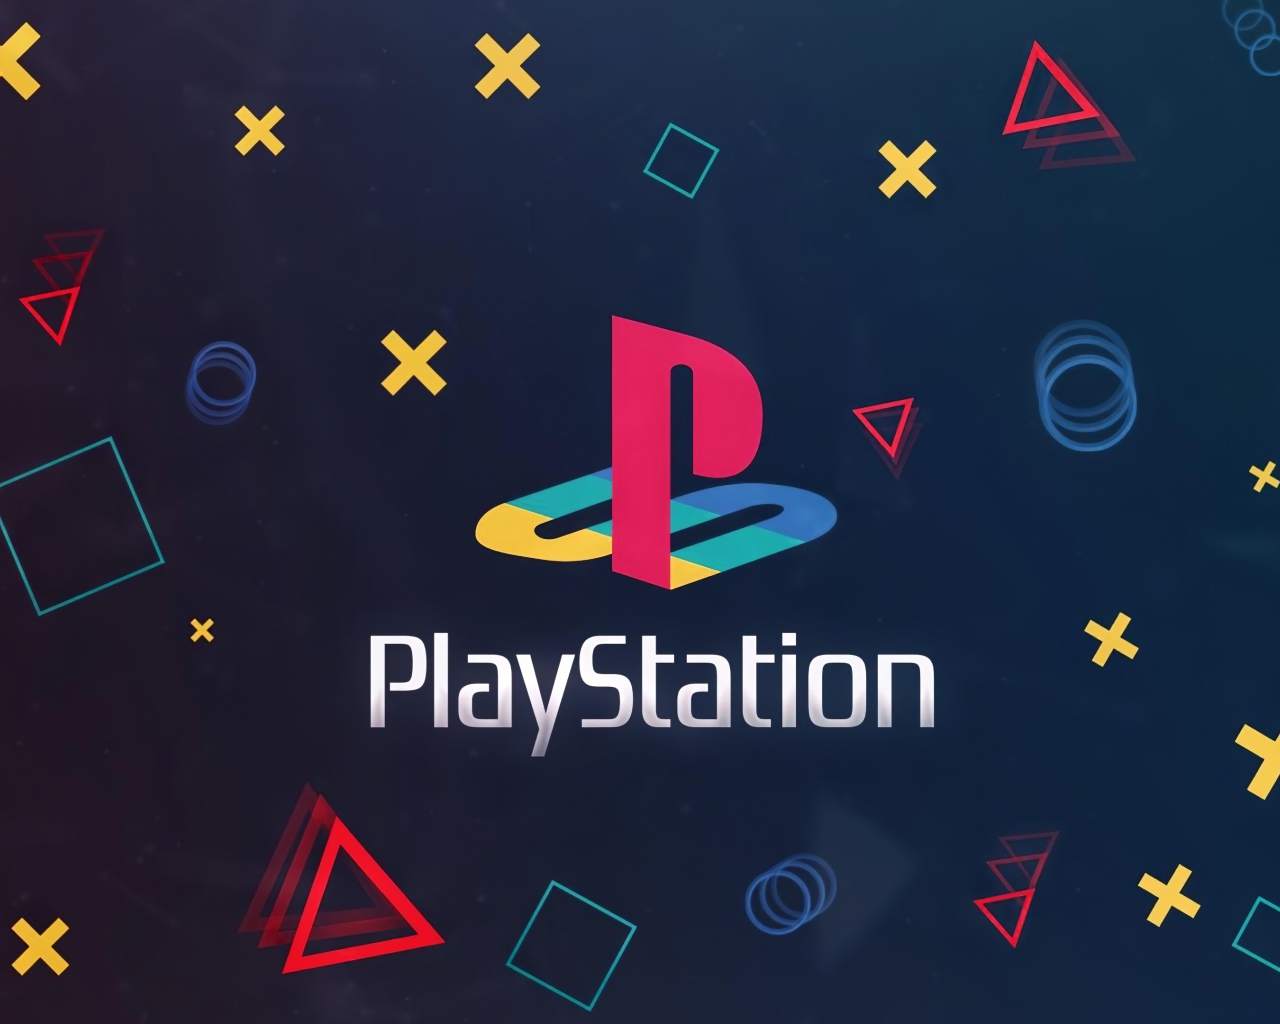 PlayStation logo on a blue background with geometric shapes.